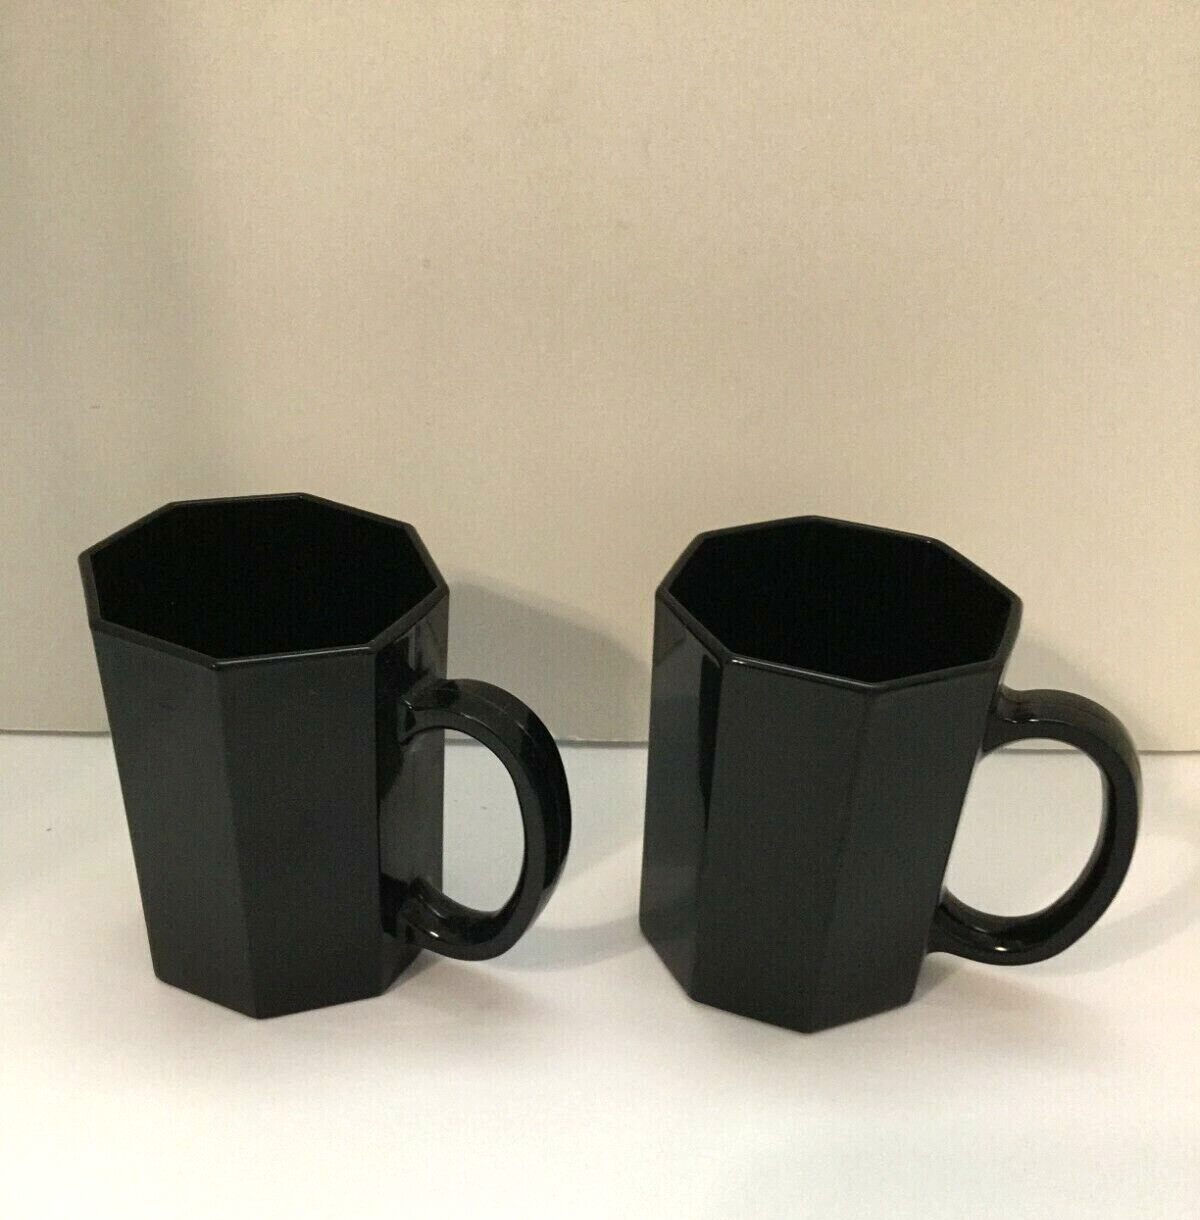 Arcoroc Octime Octagon BLACK GLASS COFFEE MUGS Made in France Set of 2